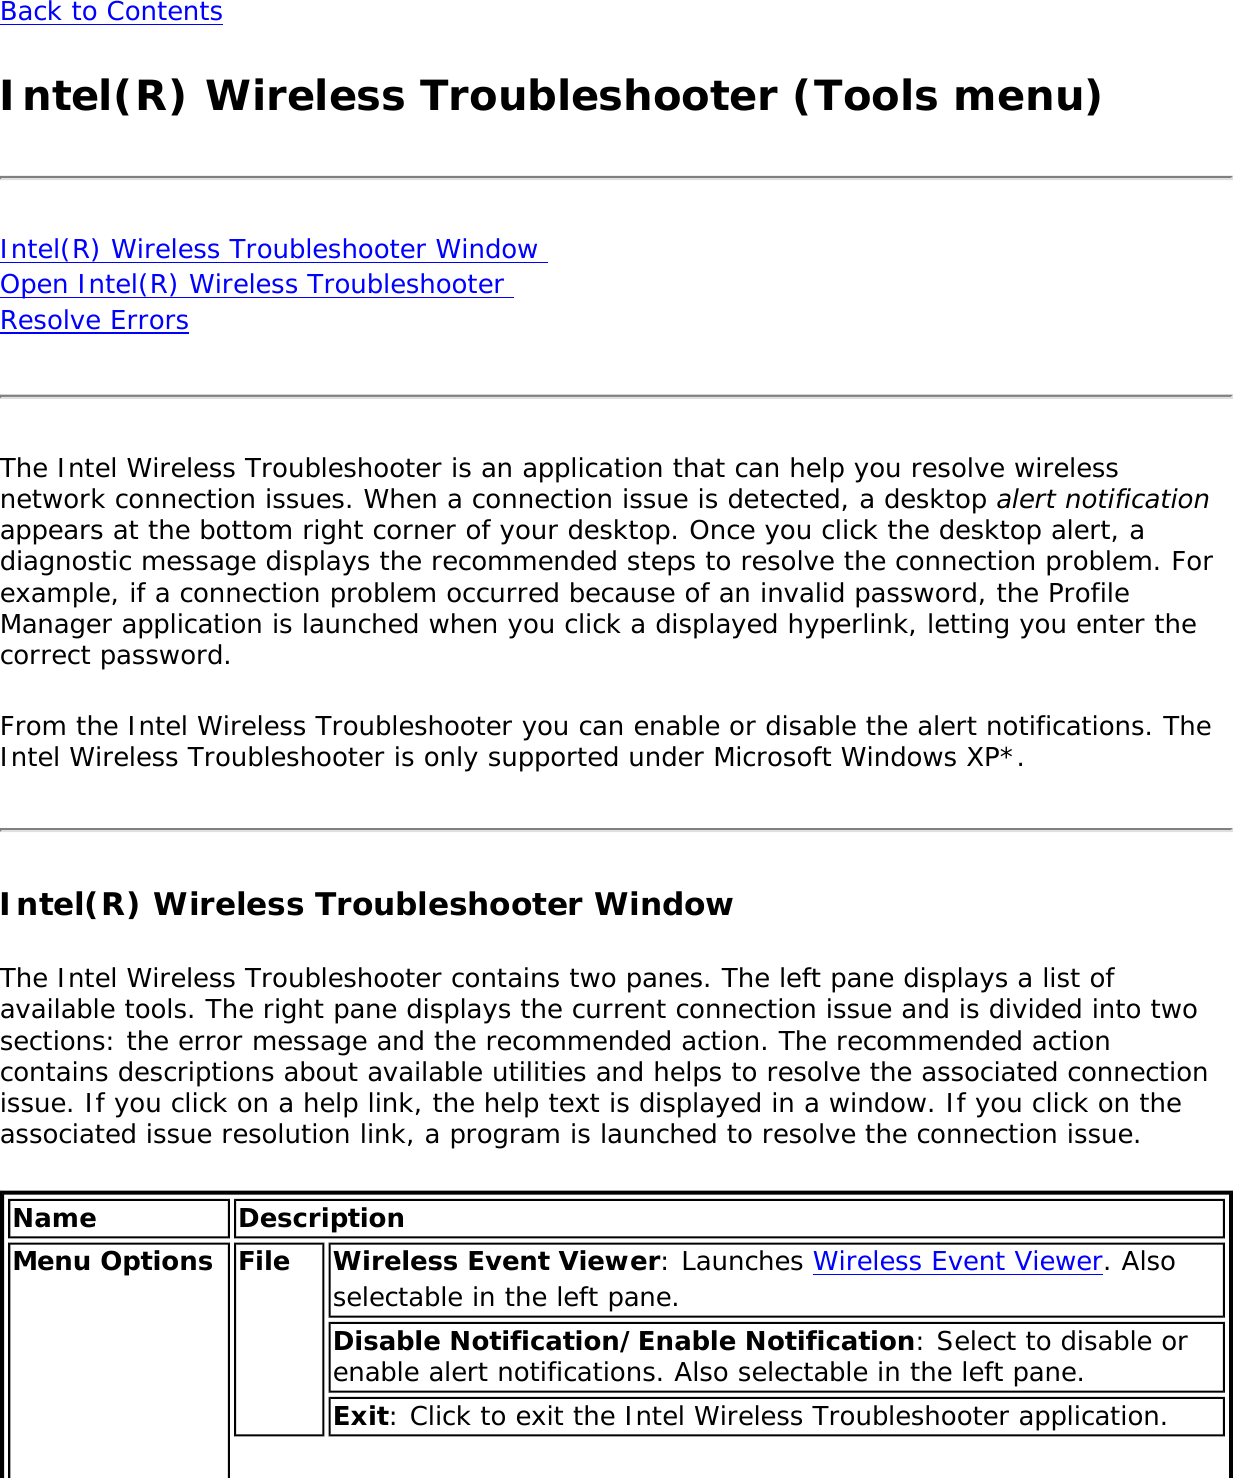 Back to ContentsIntel(R) Wireless Troubleshooter (Tools menu)Intel(R) Wireless Troubleshooter Window  Open Intel(R) Wireless Troubleshooter  Resolve ErrorsThe Intel Wireless Troubleshooter is an application that can help you resolve wireless network connection issues. When a connection issue is detected, a desktop alert notification appears at the bottom right corner of your desktop. Once you click the desktop alert, a diagnostic message displays the recommended steps to resolve the connection problem. For example, if a connection problem occurred because of an invalid password, the Profile Manager application is launched when you click a displayed hyperlink, letting you enter the correct password. From the Intel Wireless Troubleshooter you can enable or disable the alert notifications. The Intel Wireless Troubleshooter is only supported under Microsoft Windows XP*.Intel(R) Wireless Troubleshooter Window The Intel Wireless Troubleshooter contains two panes. The left pane displays a list of available tools. The right pane displays the current connection issue and is divided into two sections: the error message and the recommended action. The recommended action contains descriptions about available utilities and helps to resolve the associated connection issue. If you click on a help link, the help text is displayed in a window. If you click on the associated issue resolution link, a program is launched to resolve the connection issue.Name DescriptionMenu Options  File Wireless Event Viewer: Launches Wireless Event Viewer. Also selectable in the left pane. Disable Notification/Enable Notification: Select to disable or enable alert notifications. Also selectable in the left pane.Exit: Click to exit the Intel Wireless Troubleshooter application.